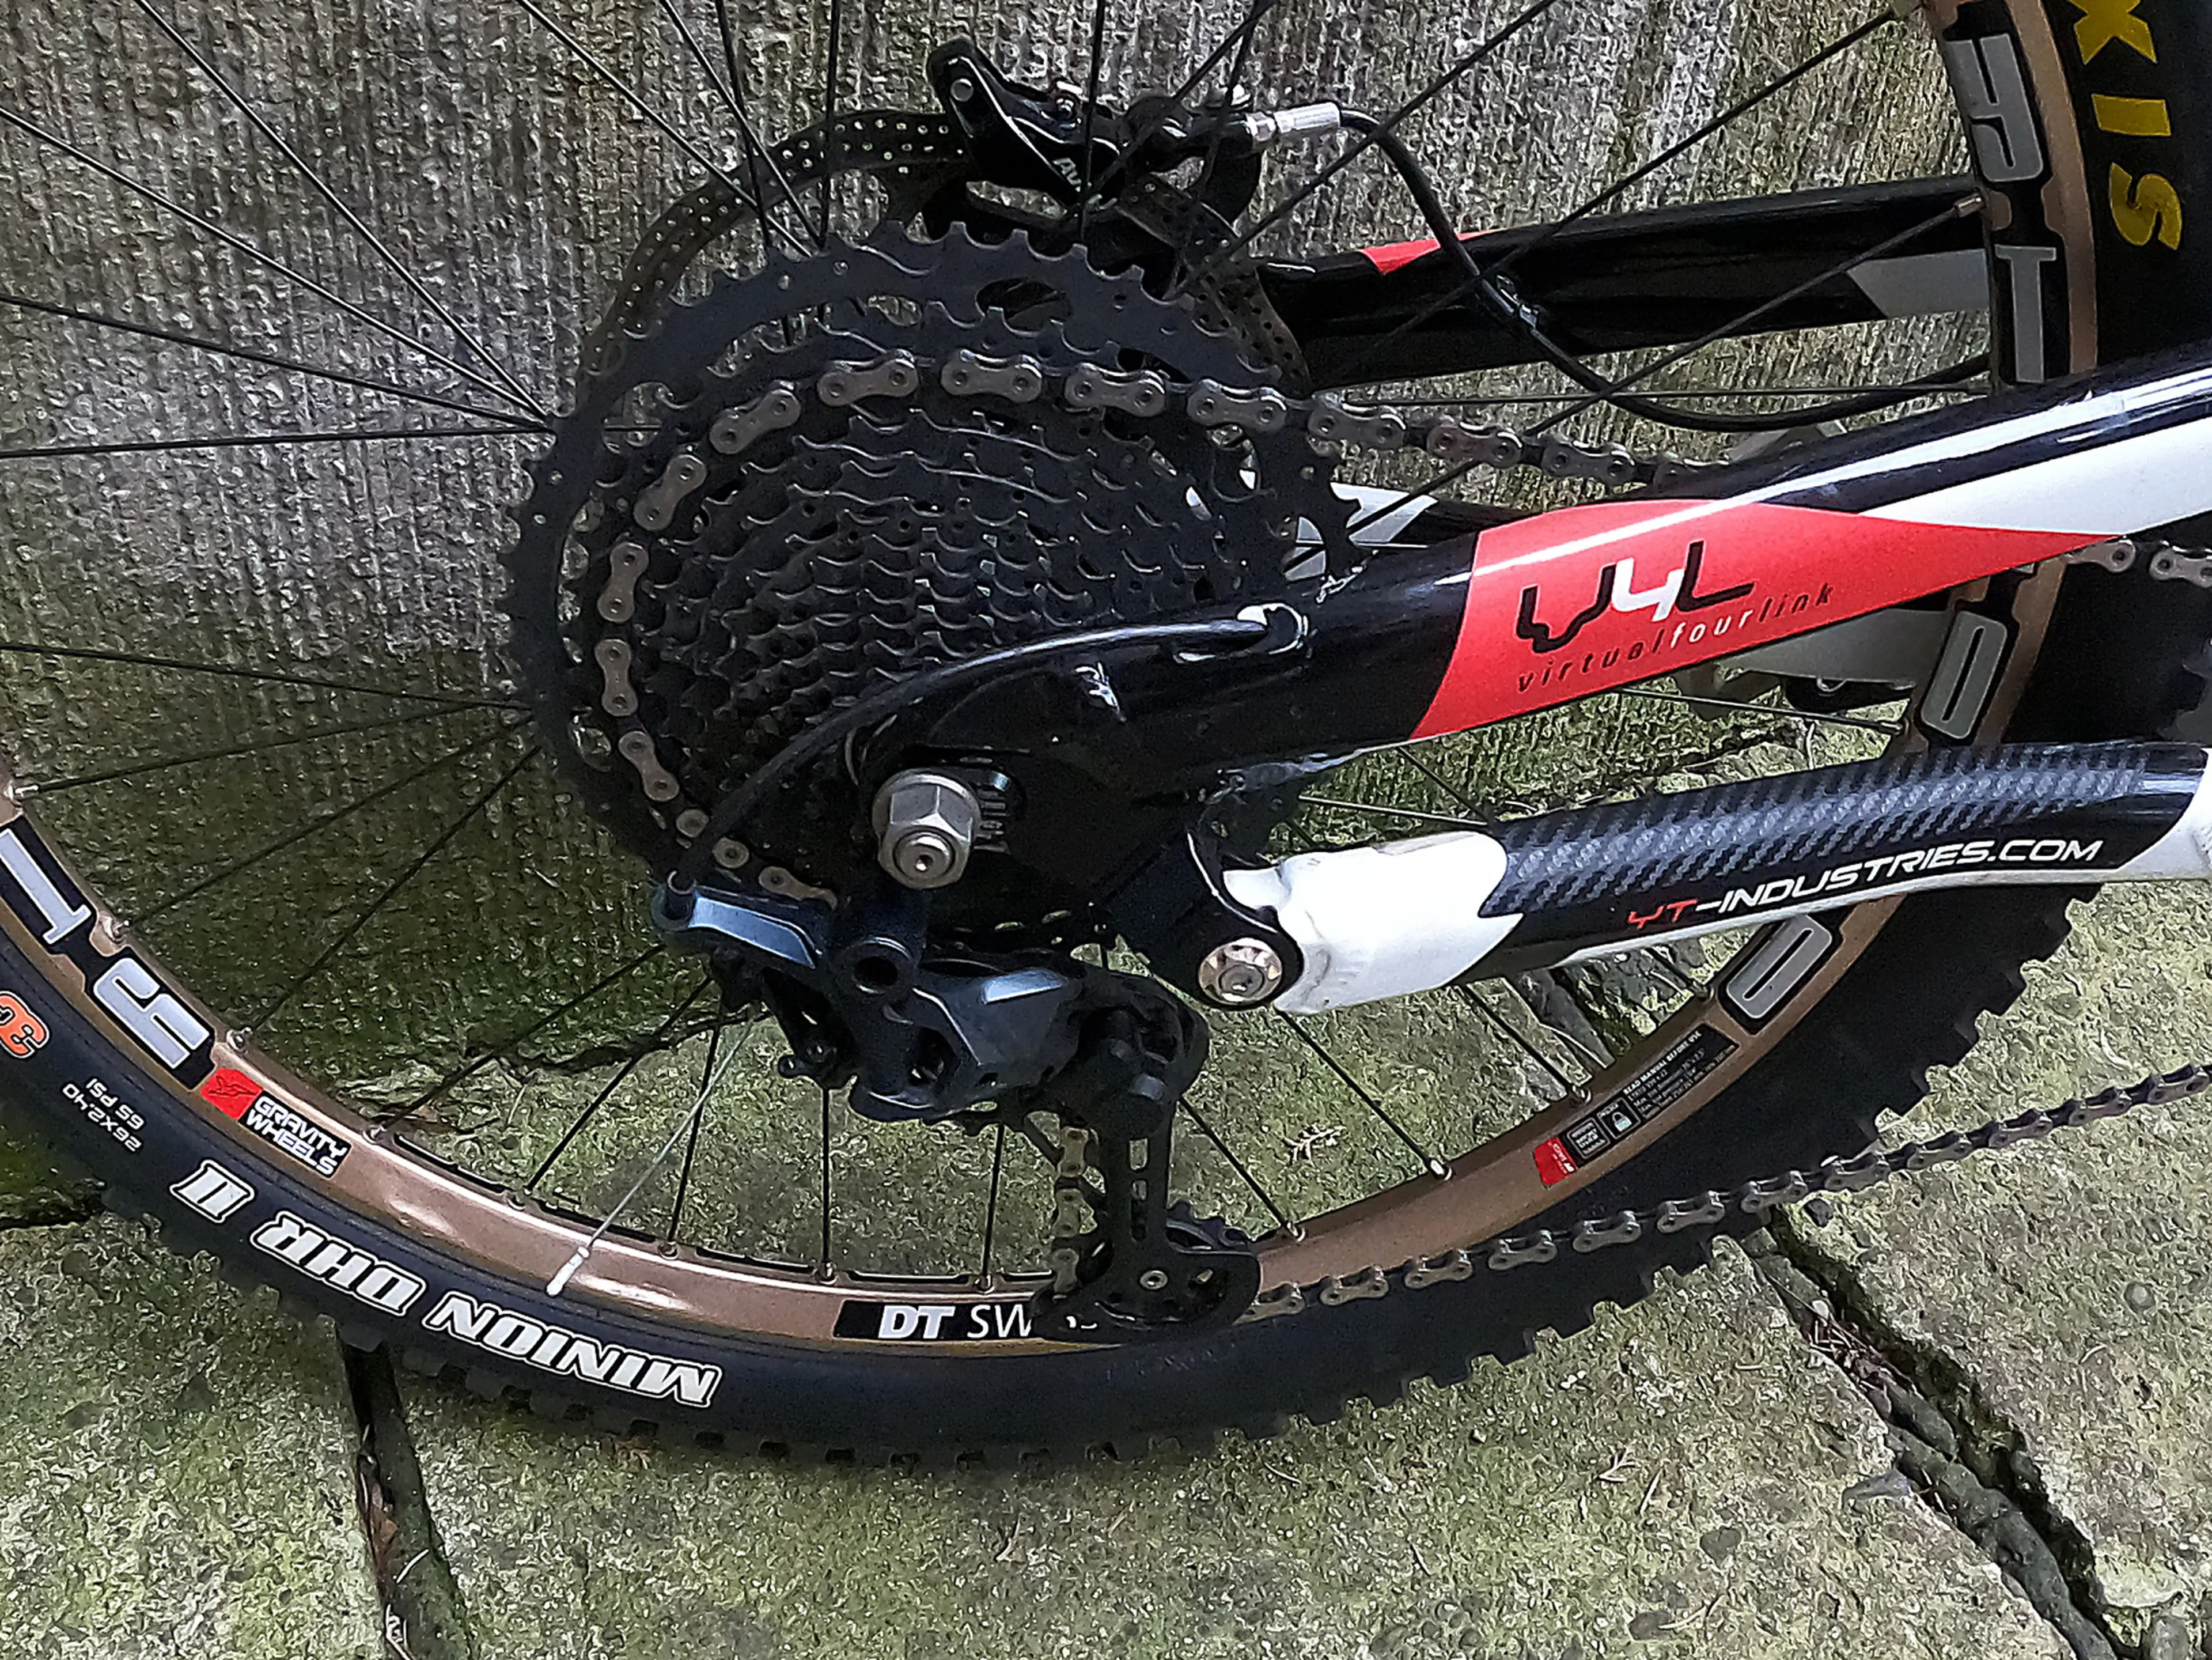 4. YT Industries Pro edition